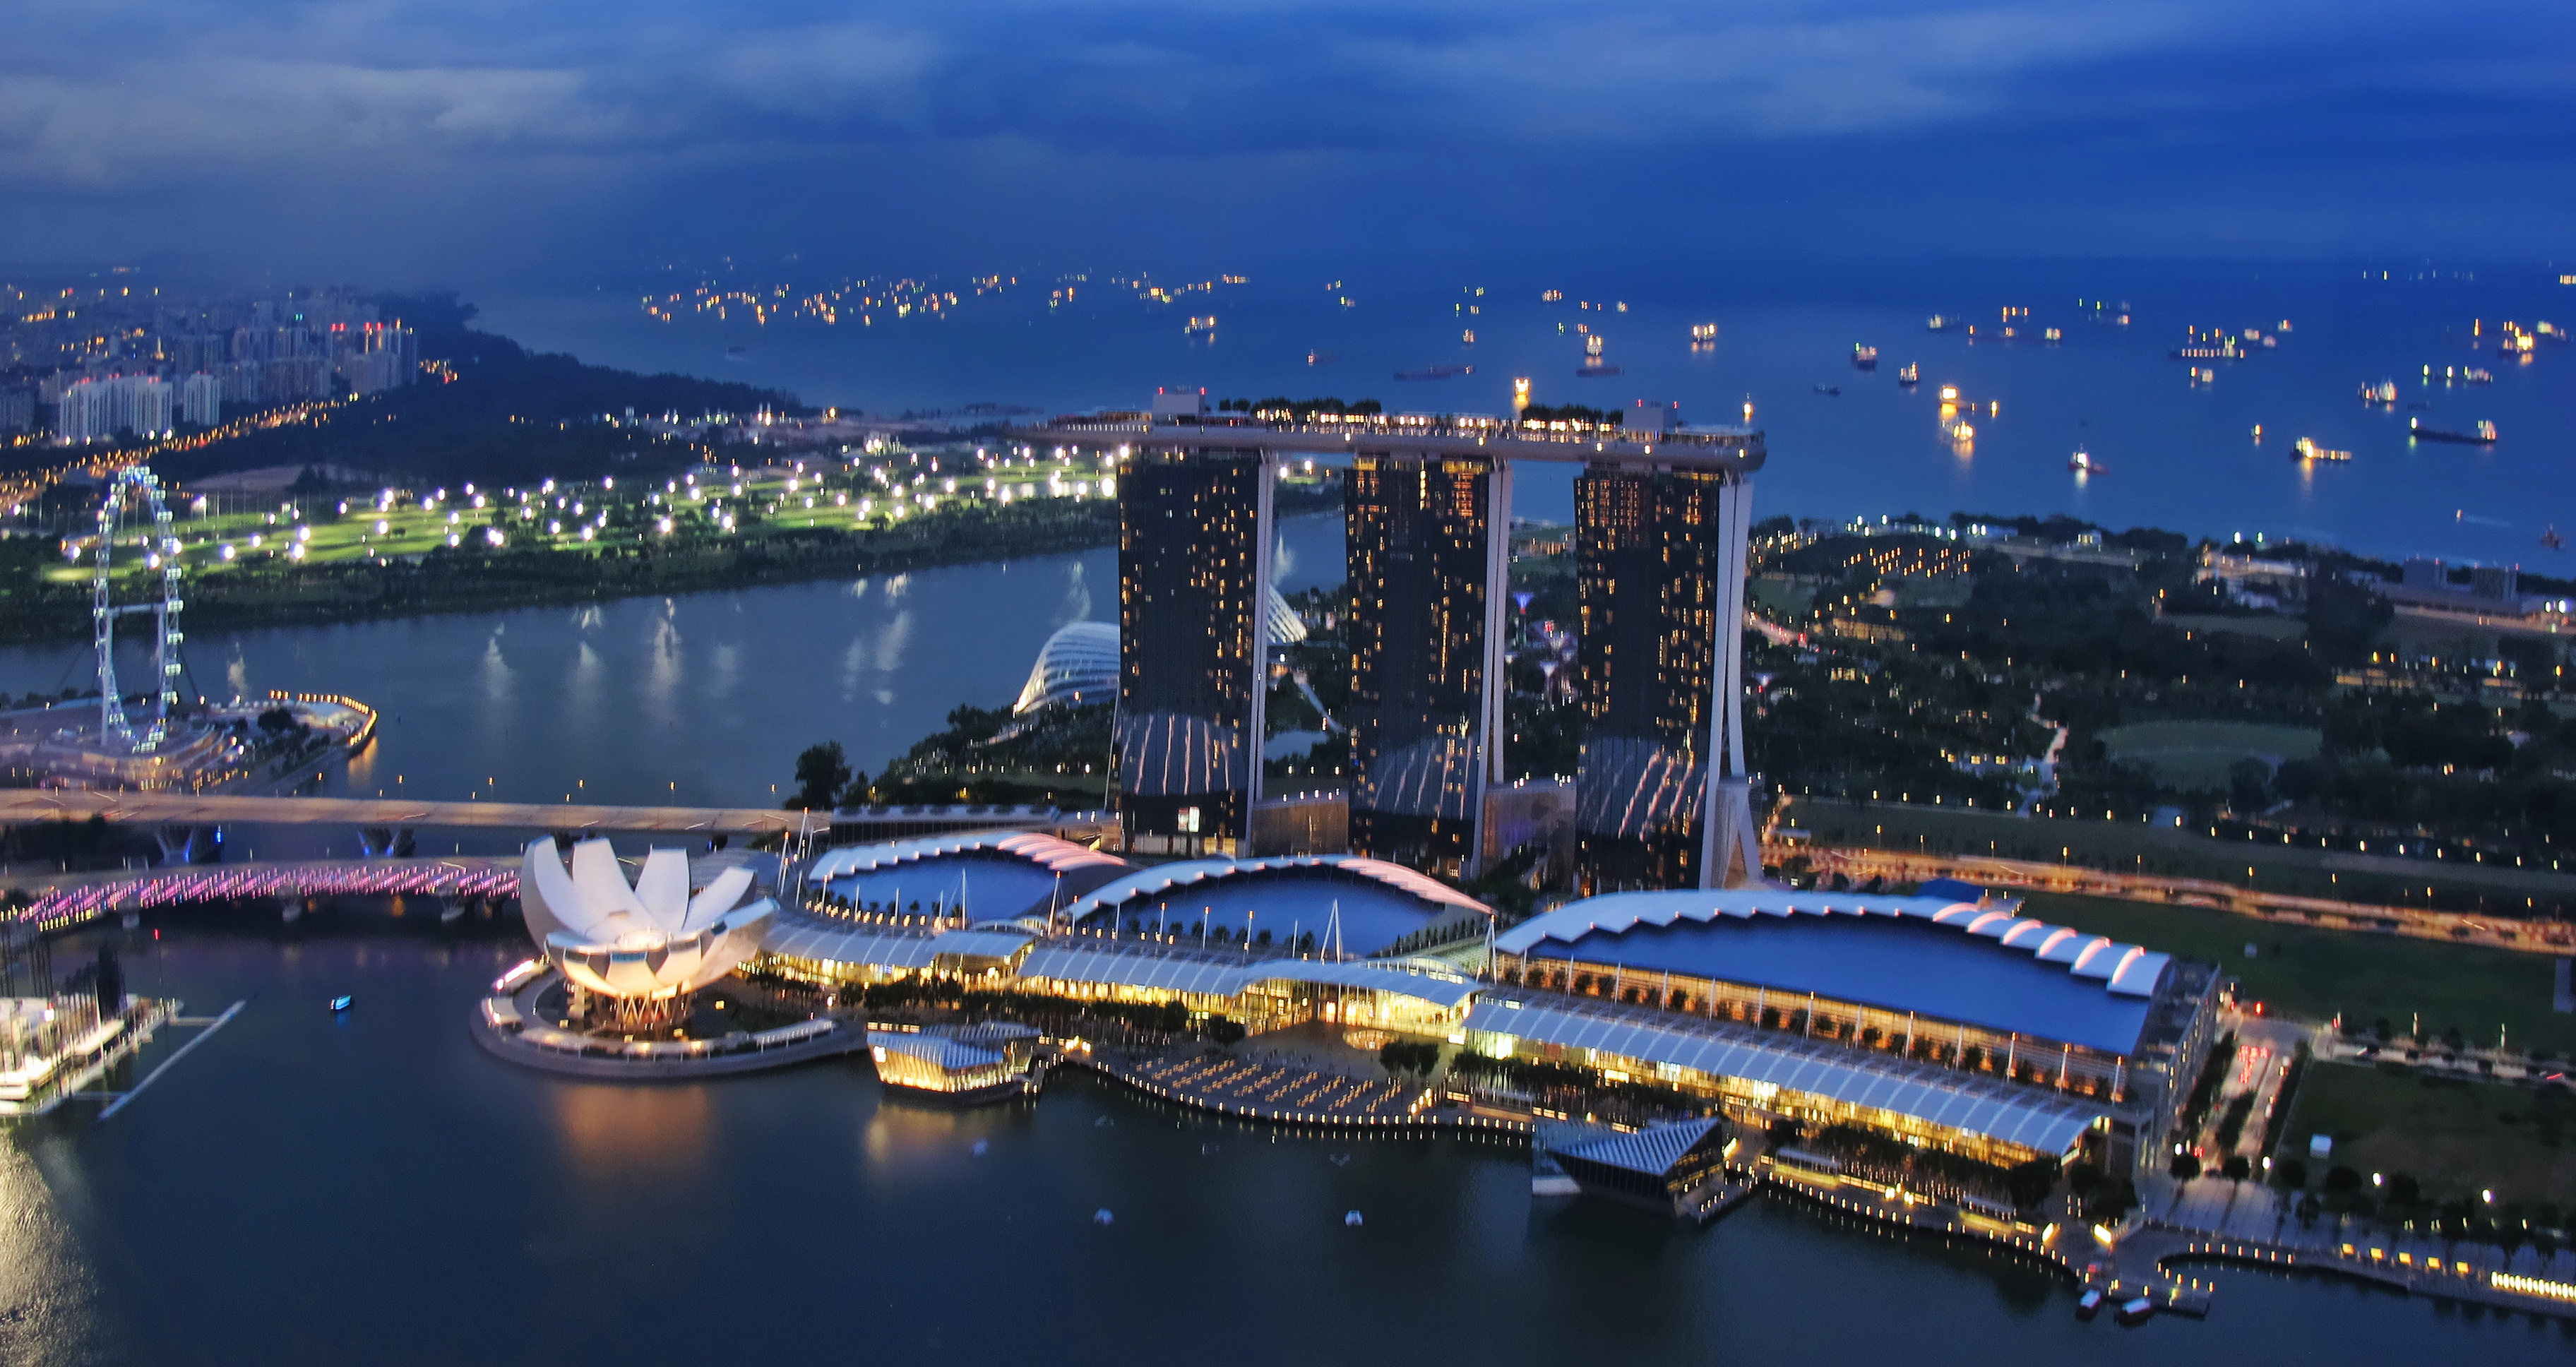 View of Marina Bay Sands @ the Blue Hour from 1 Altitude...